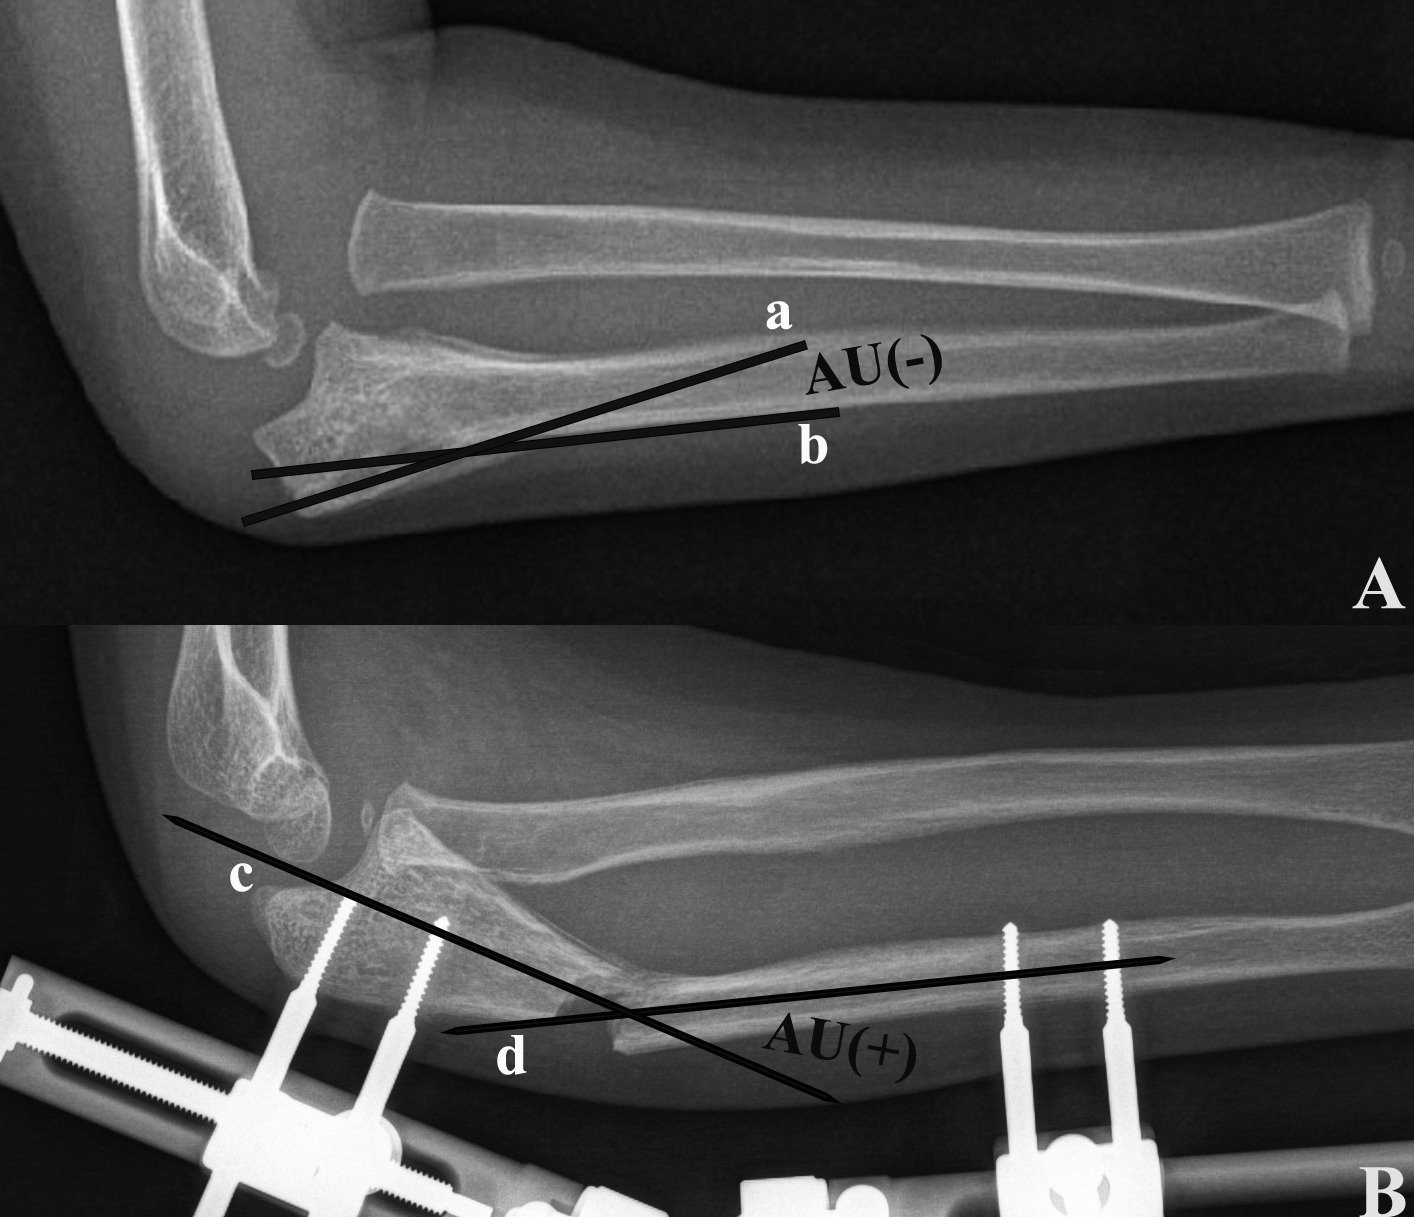 Fig. 4 
            Preoperative (A) and postoperative (B) angulation of the ulnar (AU) measured on lateral radiographs. AU is the angle between the axis of the proximal (lines a and c) and distal portions of the ulna (lines b and d). It is expressed as zero when the two axes are parallel, negative when the apex of the intersecting axes is inferior (forming an inverted V-shape), and positive when superior (forming a V-shape).
          